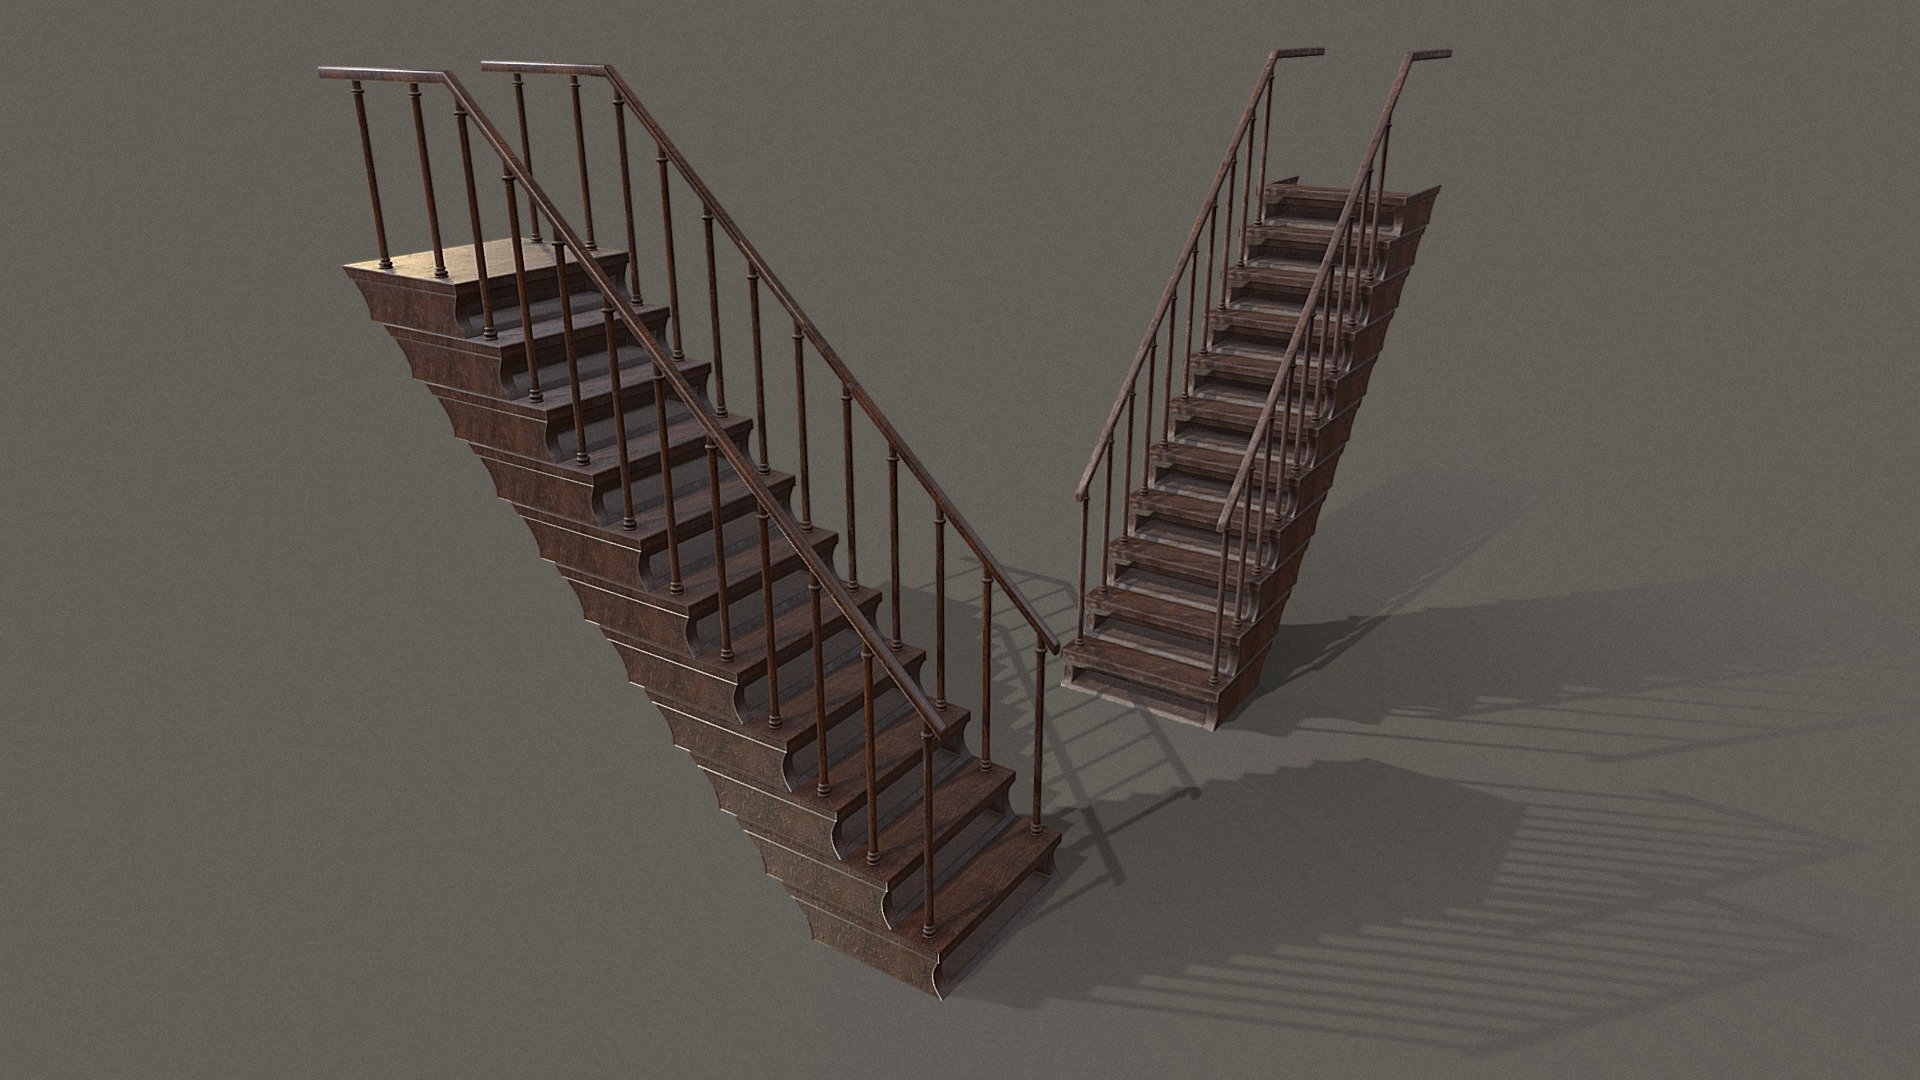 A set of staircases, the different being one texture set is more worn.   Super handy prop for any sort of interior environment.

PBR textures @4k - Staircases - Buy Royalty Free 3D model by Sousinho 3d model